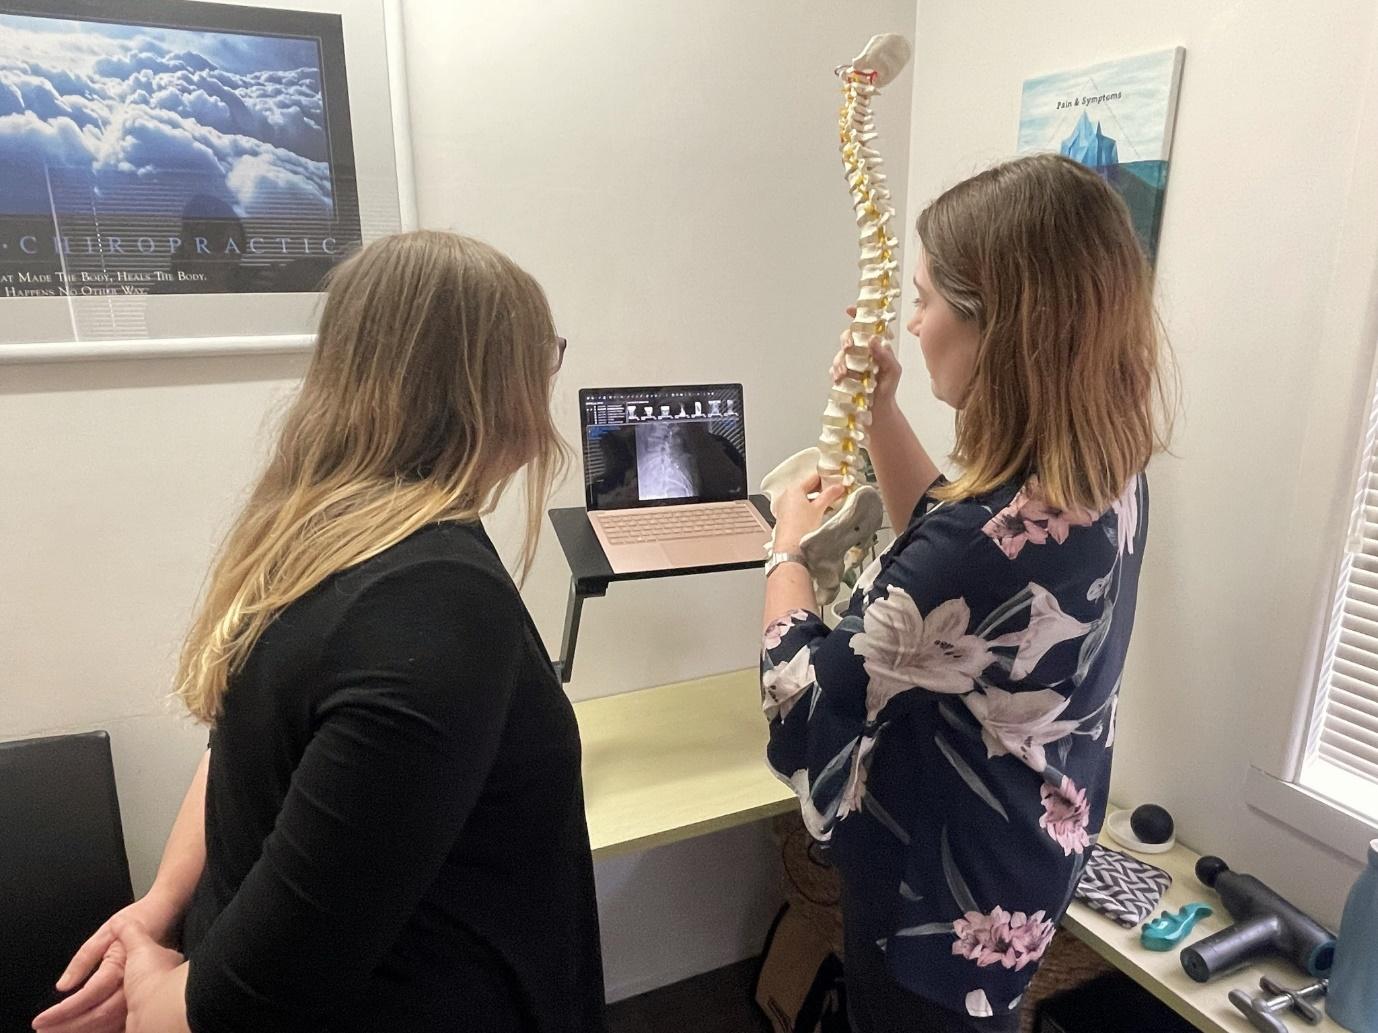 A person looking at a spine model

Description automatically generated with low confidence